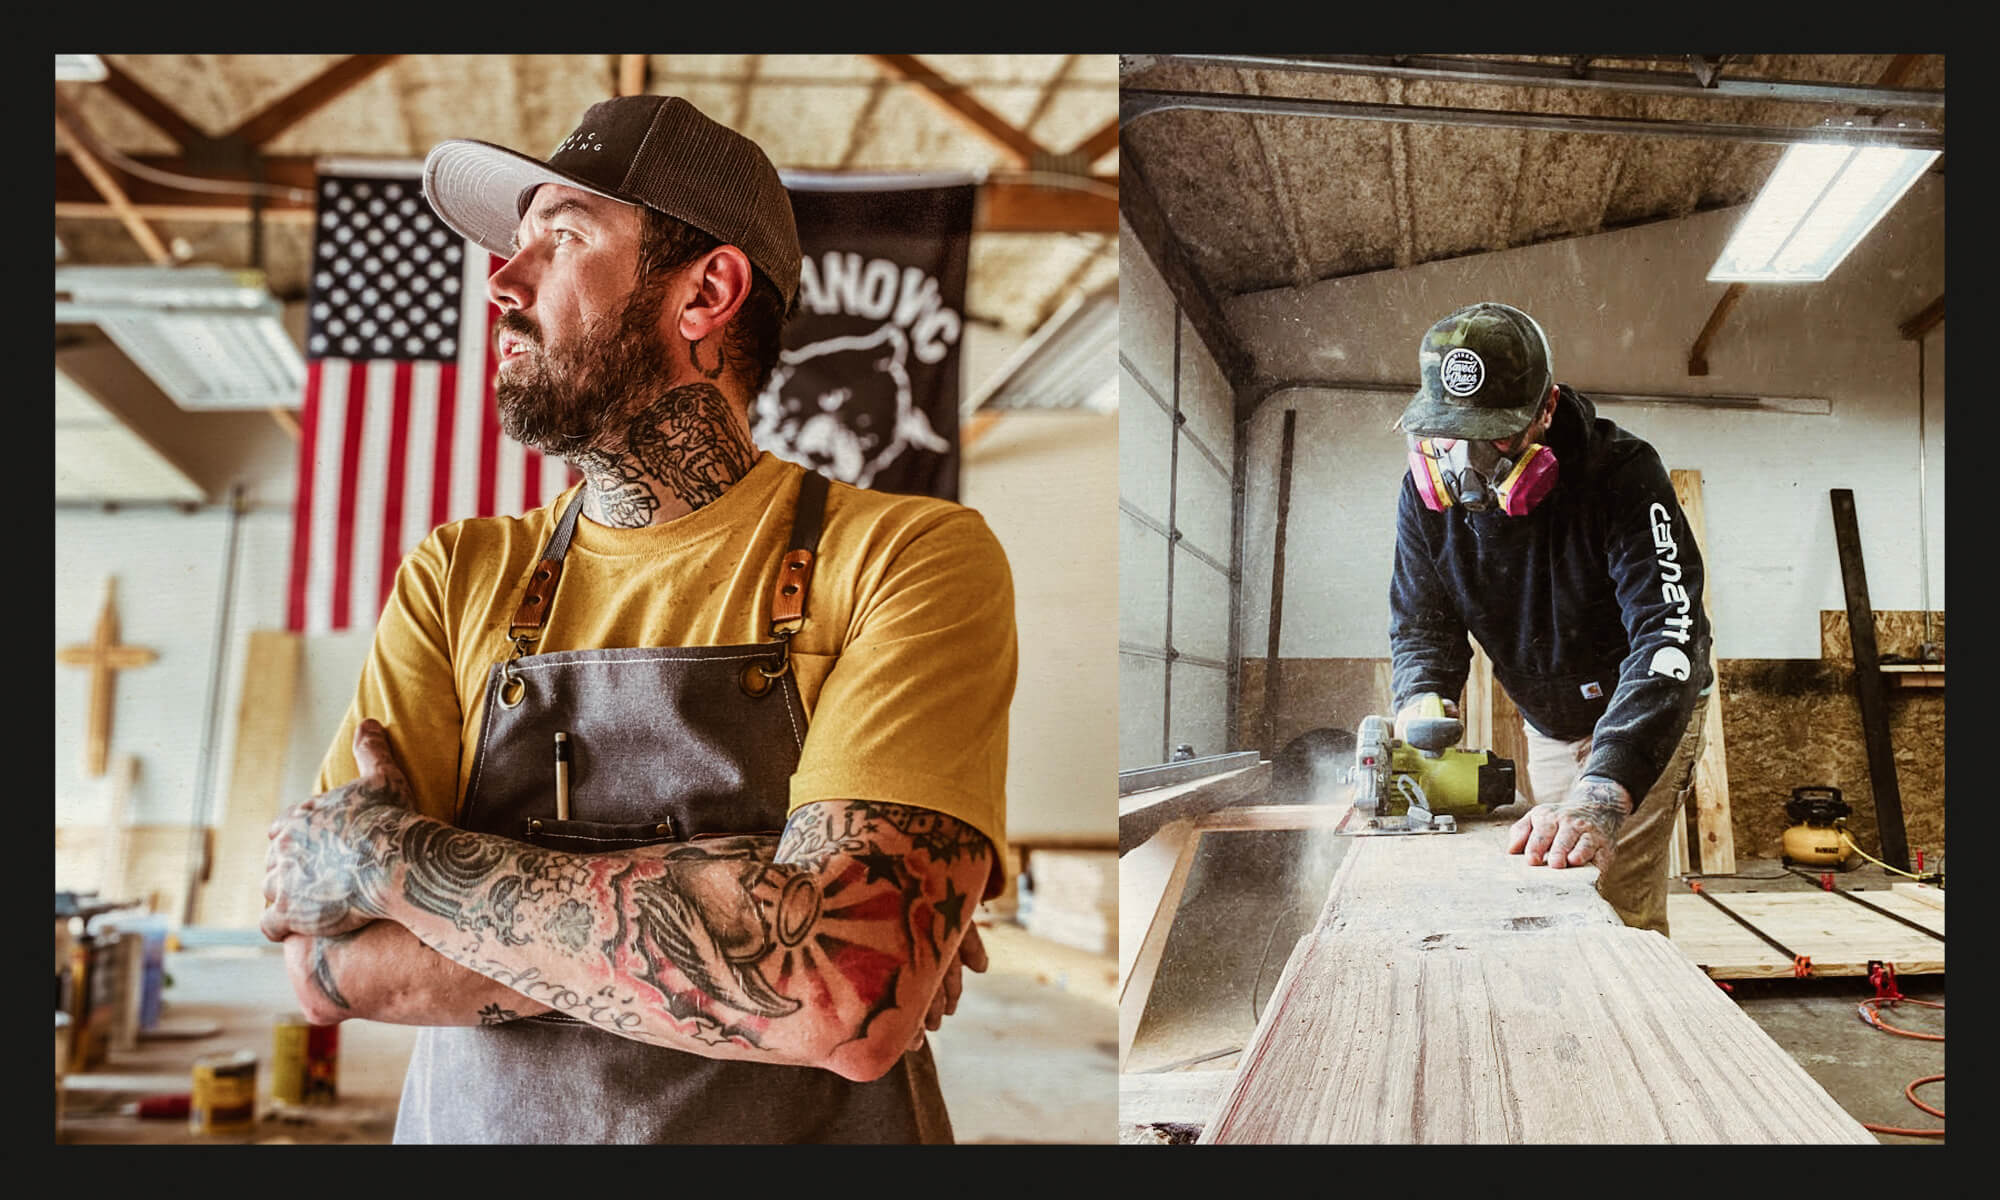 Images of Bobby in his home workshop